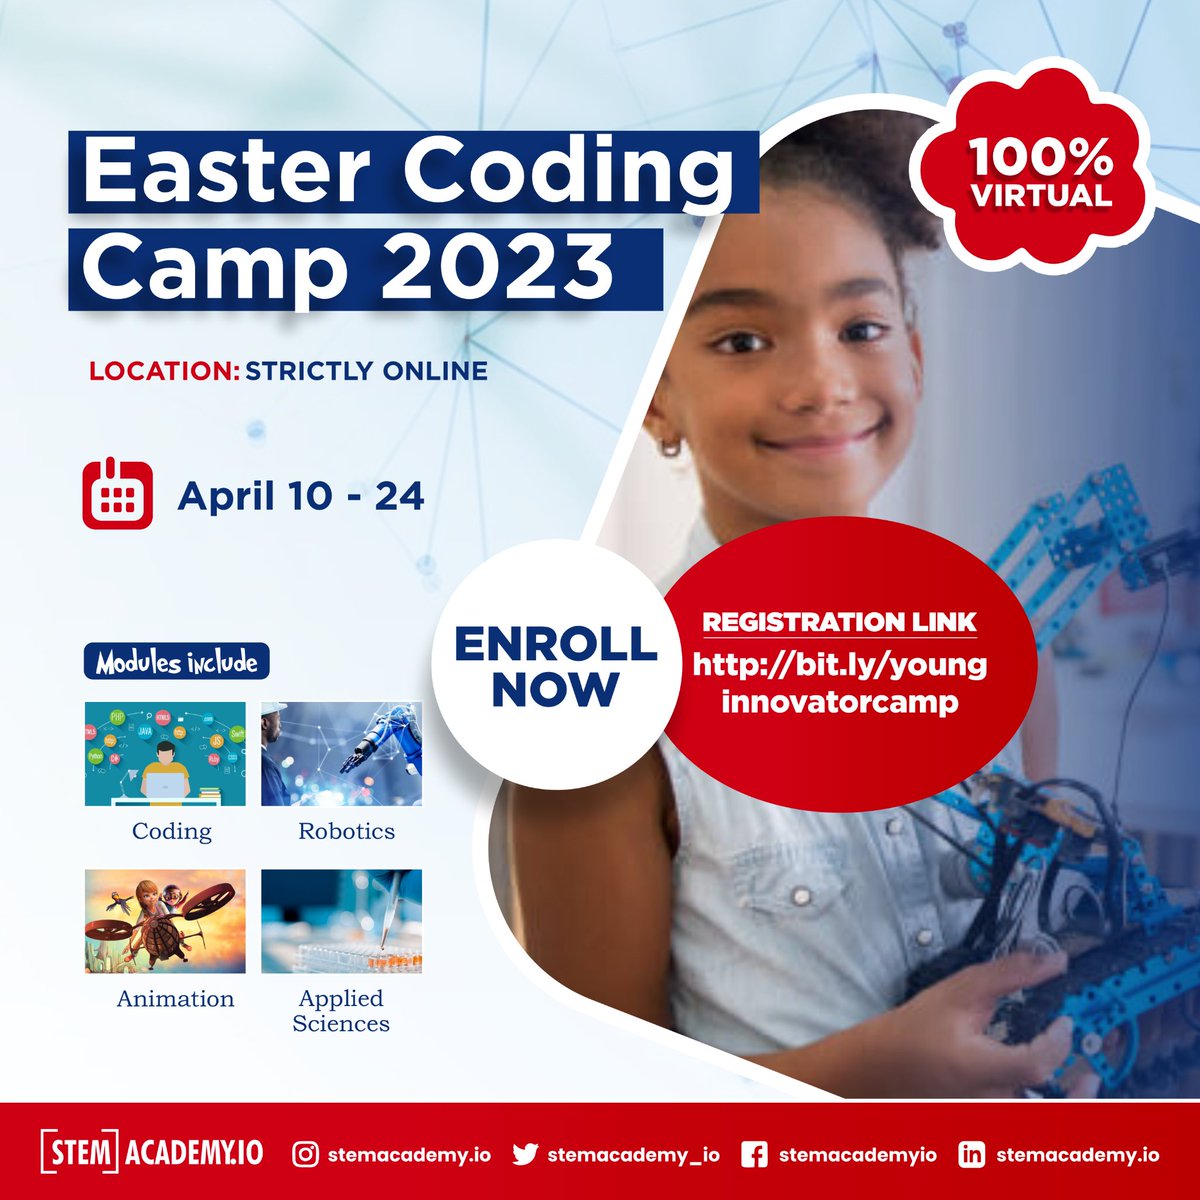 Harnessing ones creativity = greater wisdom.

Join campers at the 2023 STEM Easter Camp and get rightly started in Tech.

bit.ly/younginnovator…

REGISTRATION IS FREE.

#stemeducation #youngdevelopers #younginnovators #technology #edtech #education #programming